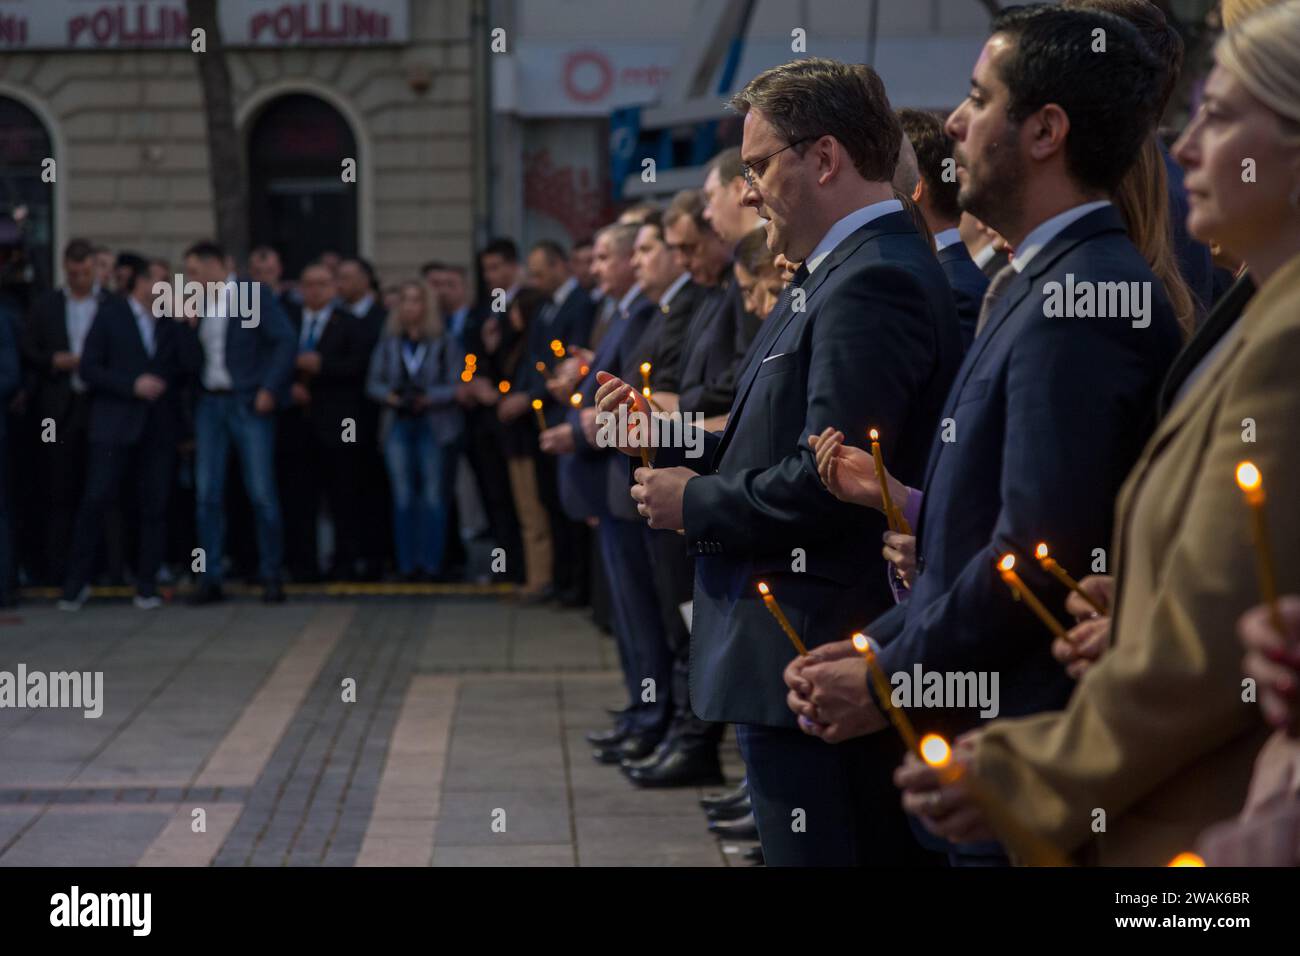 Beijing, Serbia. 24th Mar, 2023. Serbian government officials attend a ceremony marking the Remembrance Day of victims of the 1999 NATO aggression against the Federal Republic of Yugoslavia in Sombor, Serbia, March 24, 2023. Credit: Shi Zhongyu/Xinhua/Alamy Live News Stock Photo